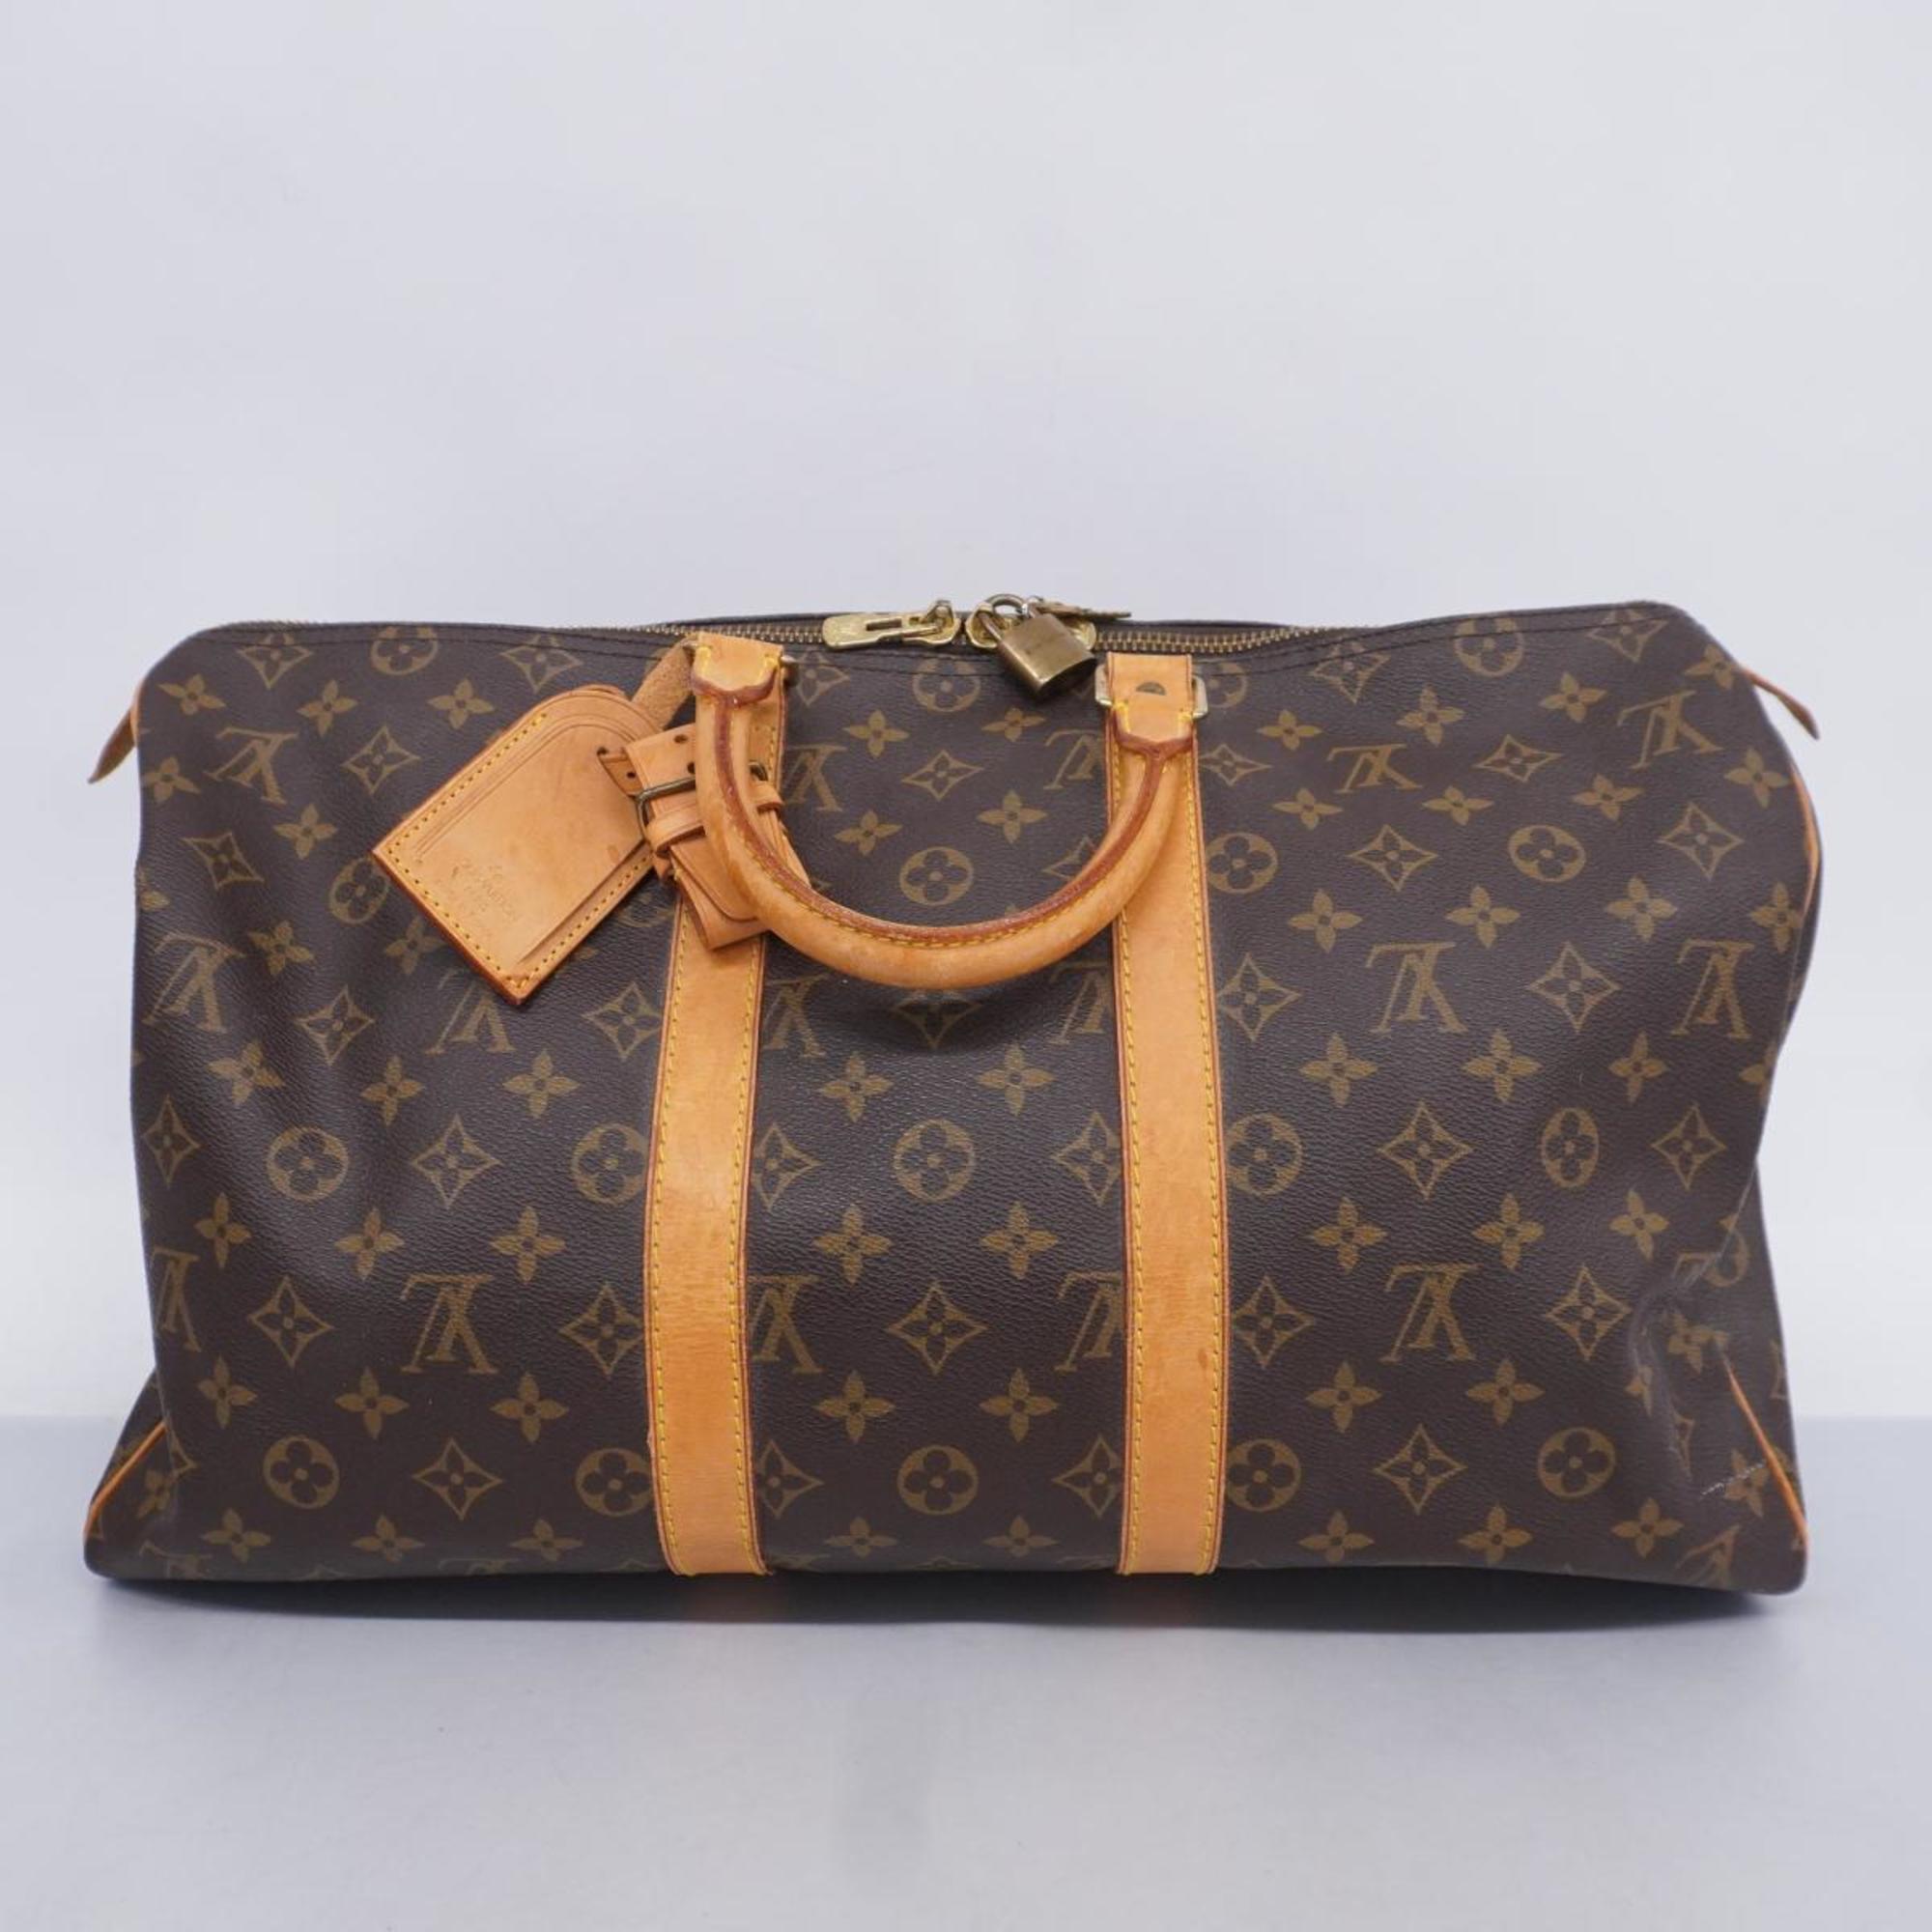 LOUIS VUITTON キーポル 45キーポル45 - 旅行用バッグ/キャリーバッグ